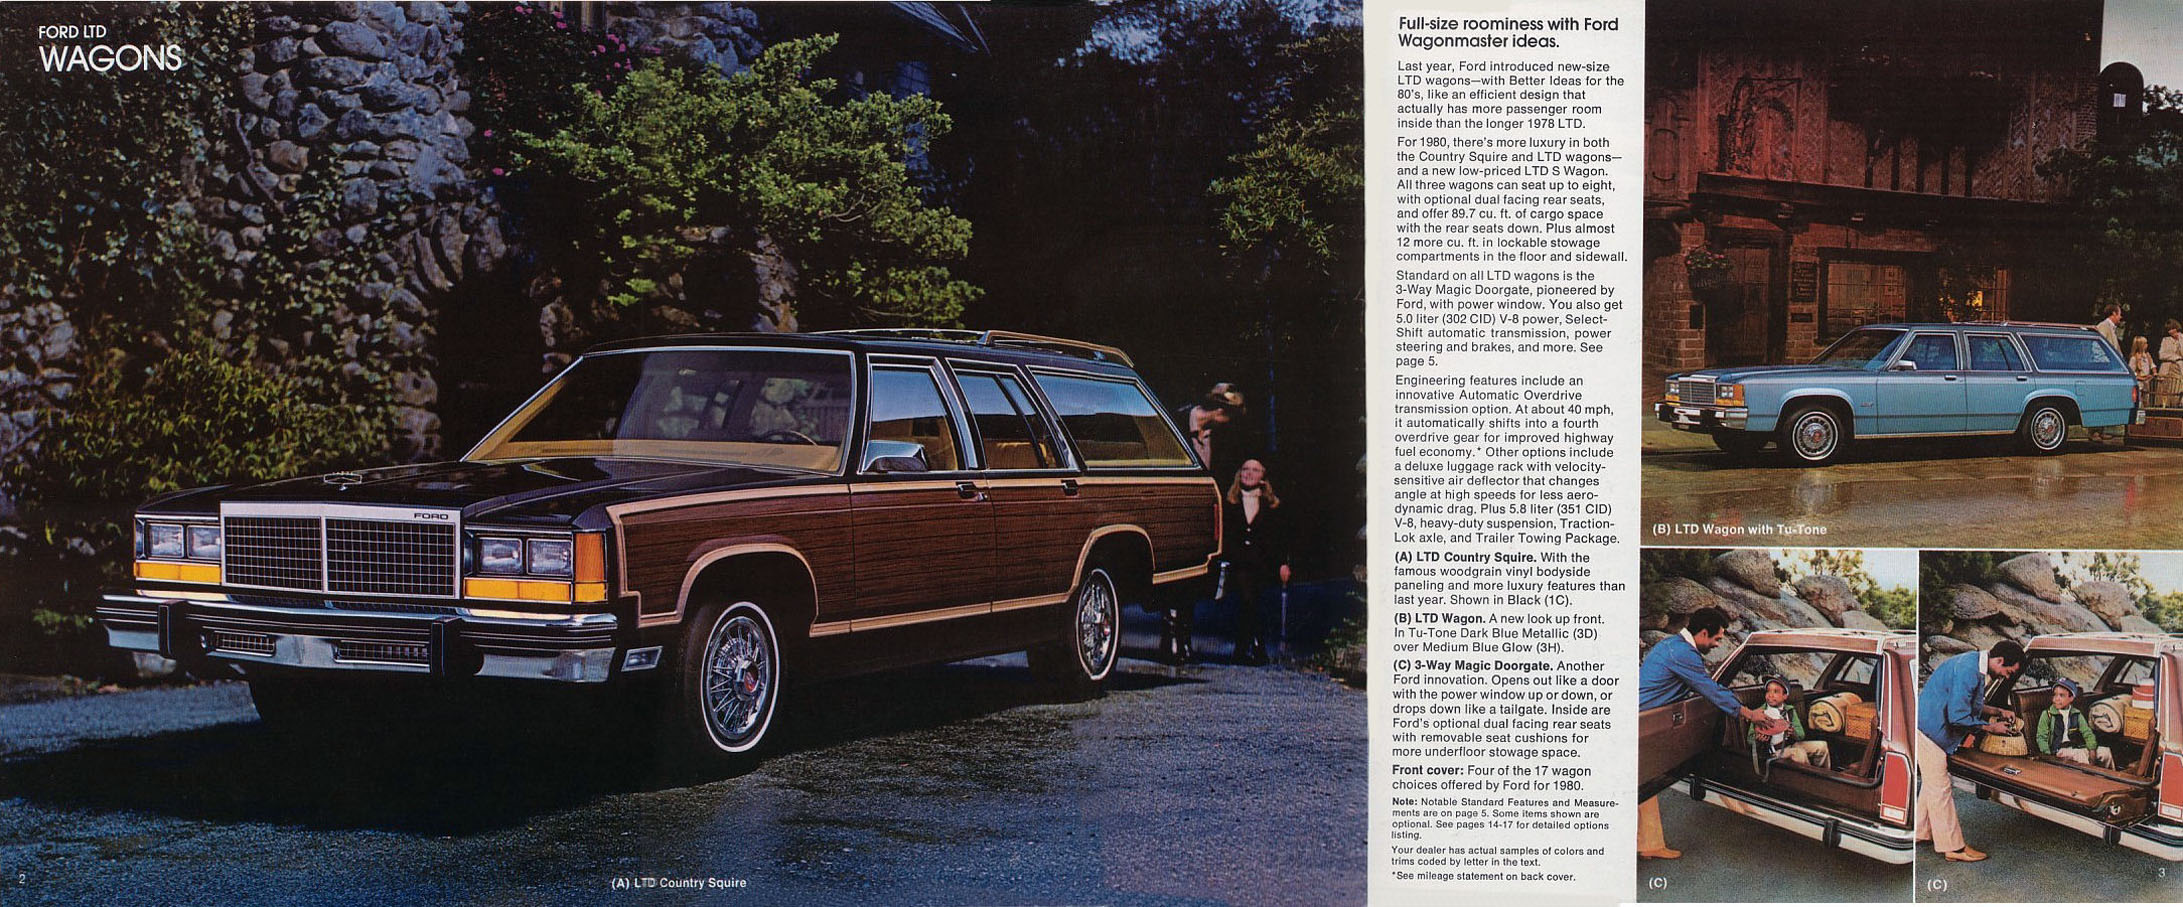 1980 Ford Wagons-02